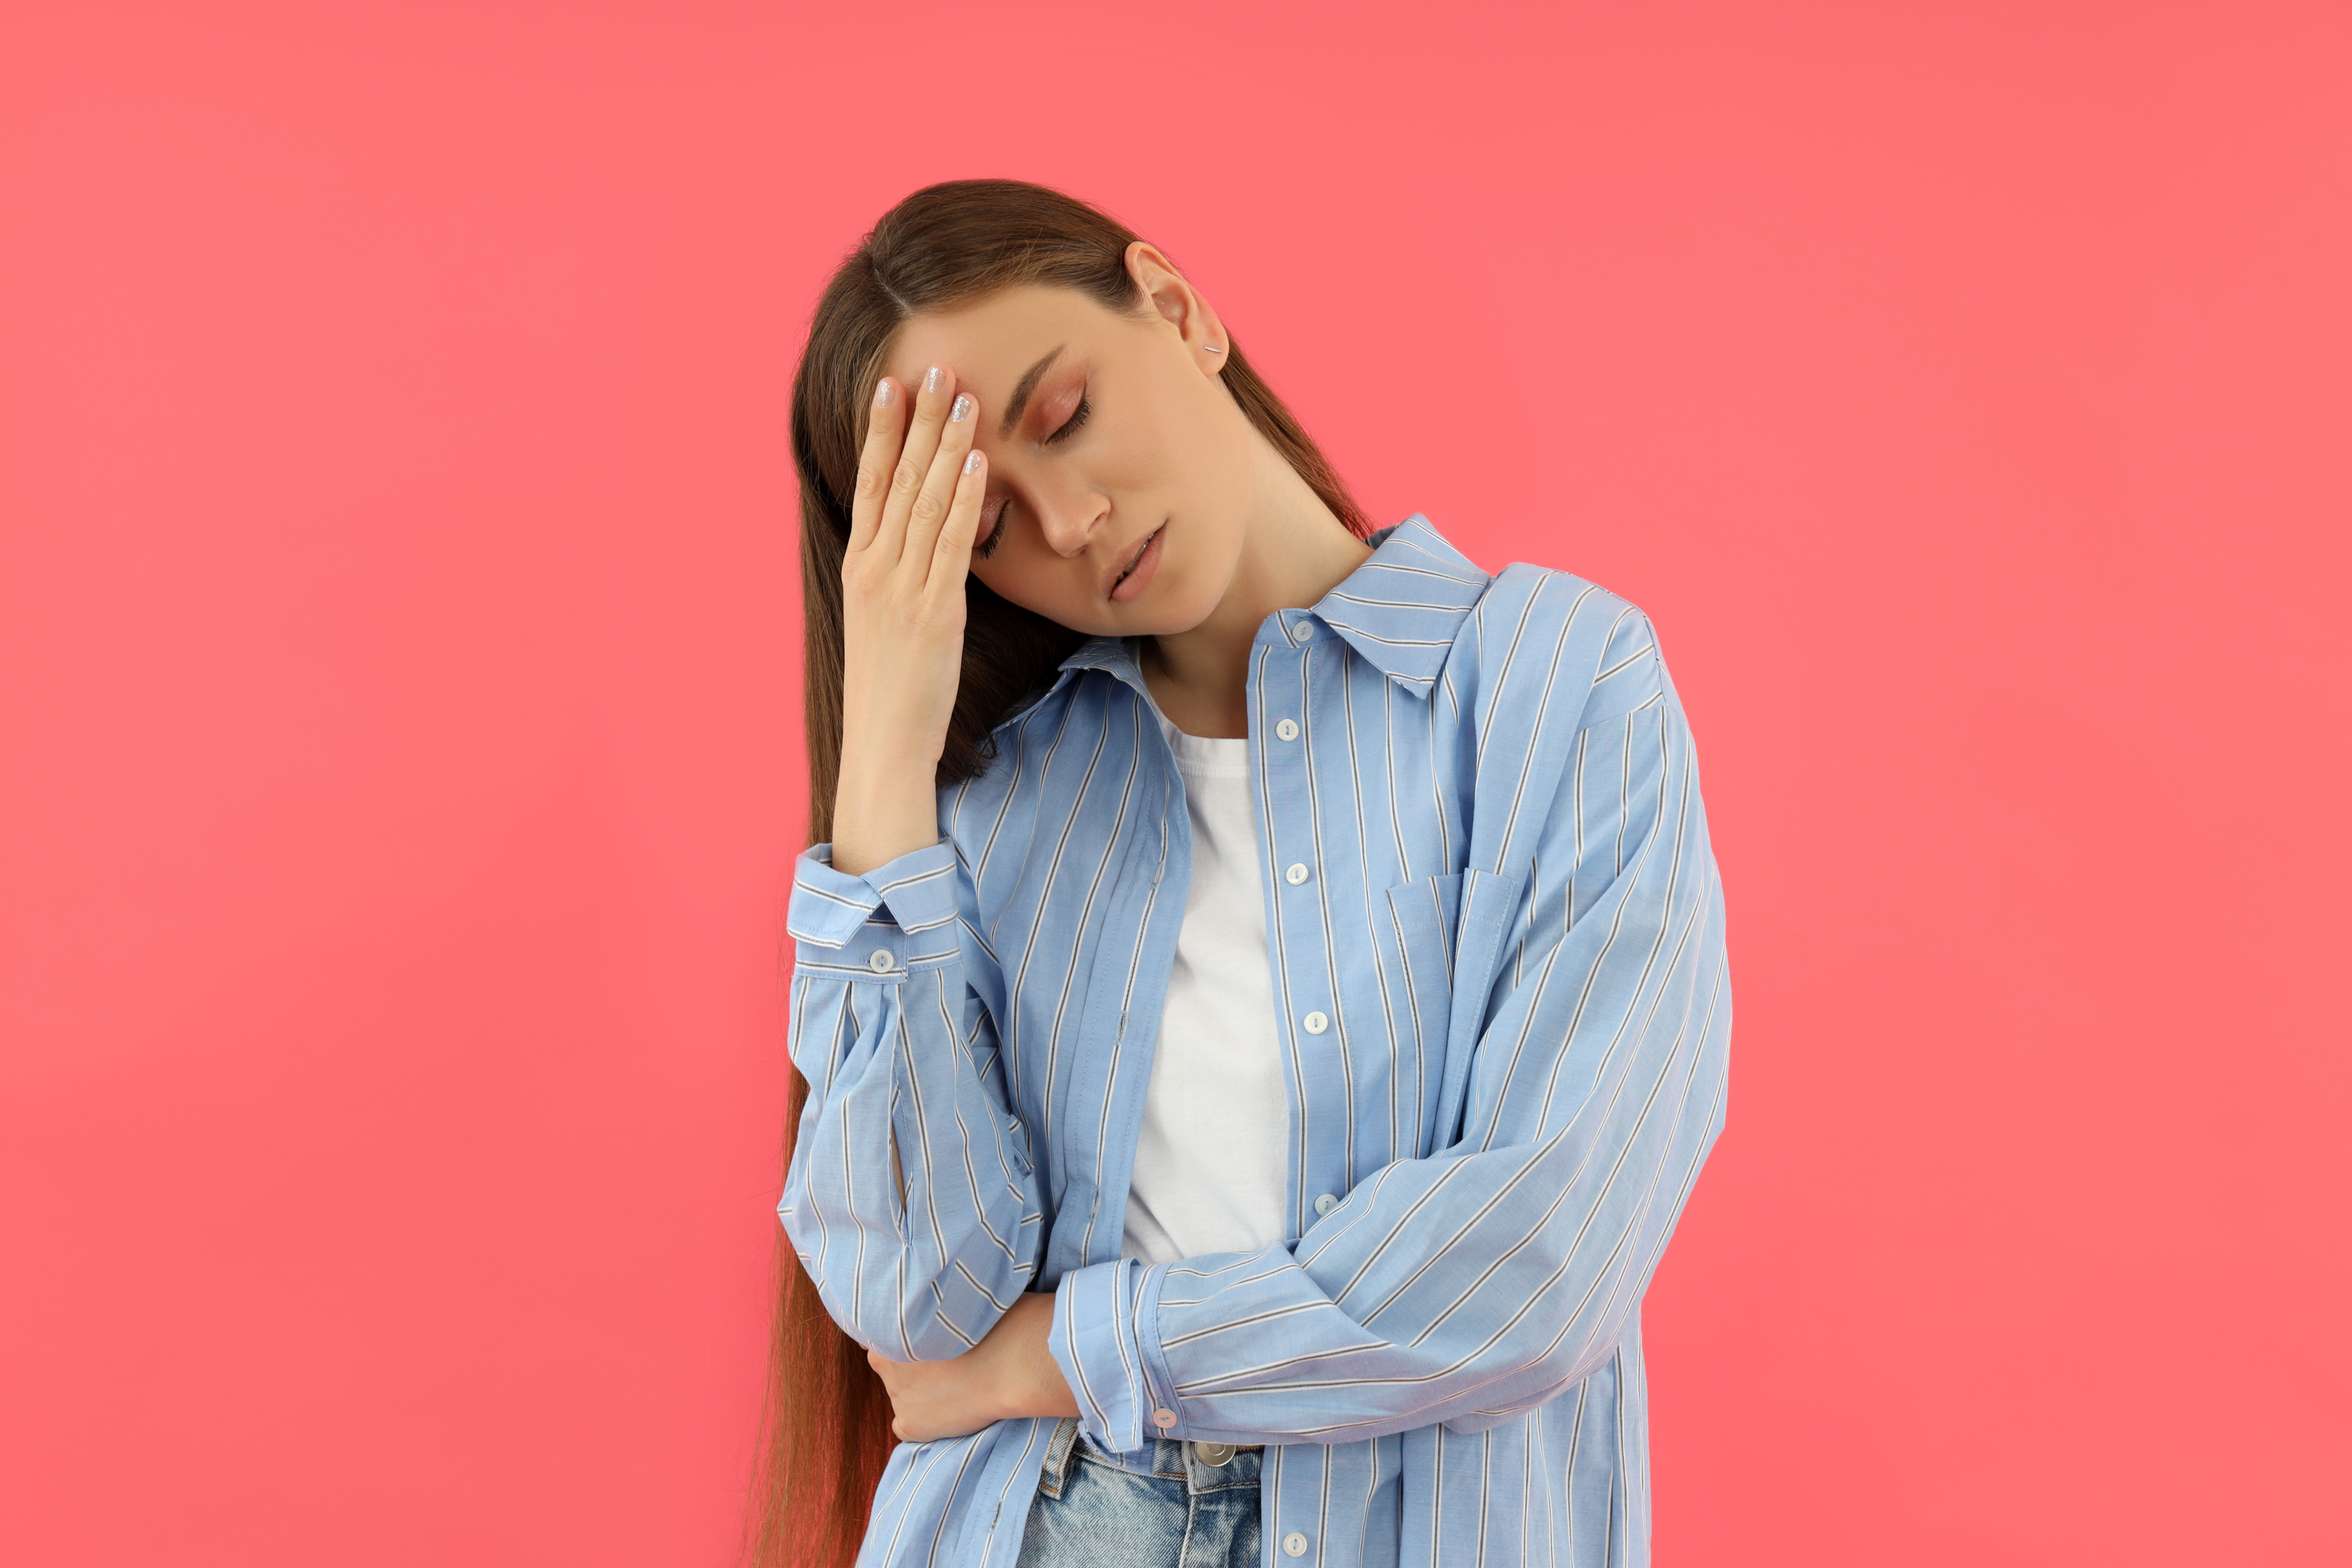 Fatigue is a common symptom of women's reproductive and lifestyle issues.